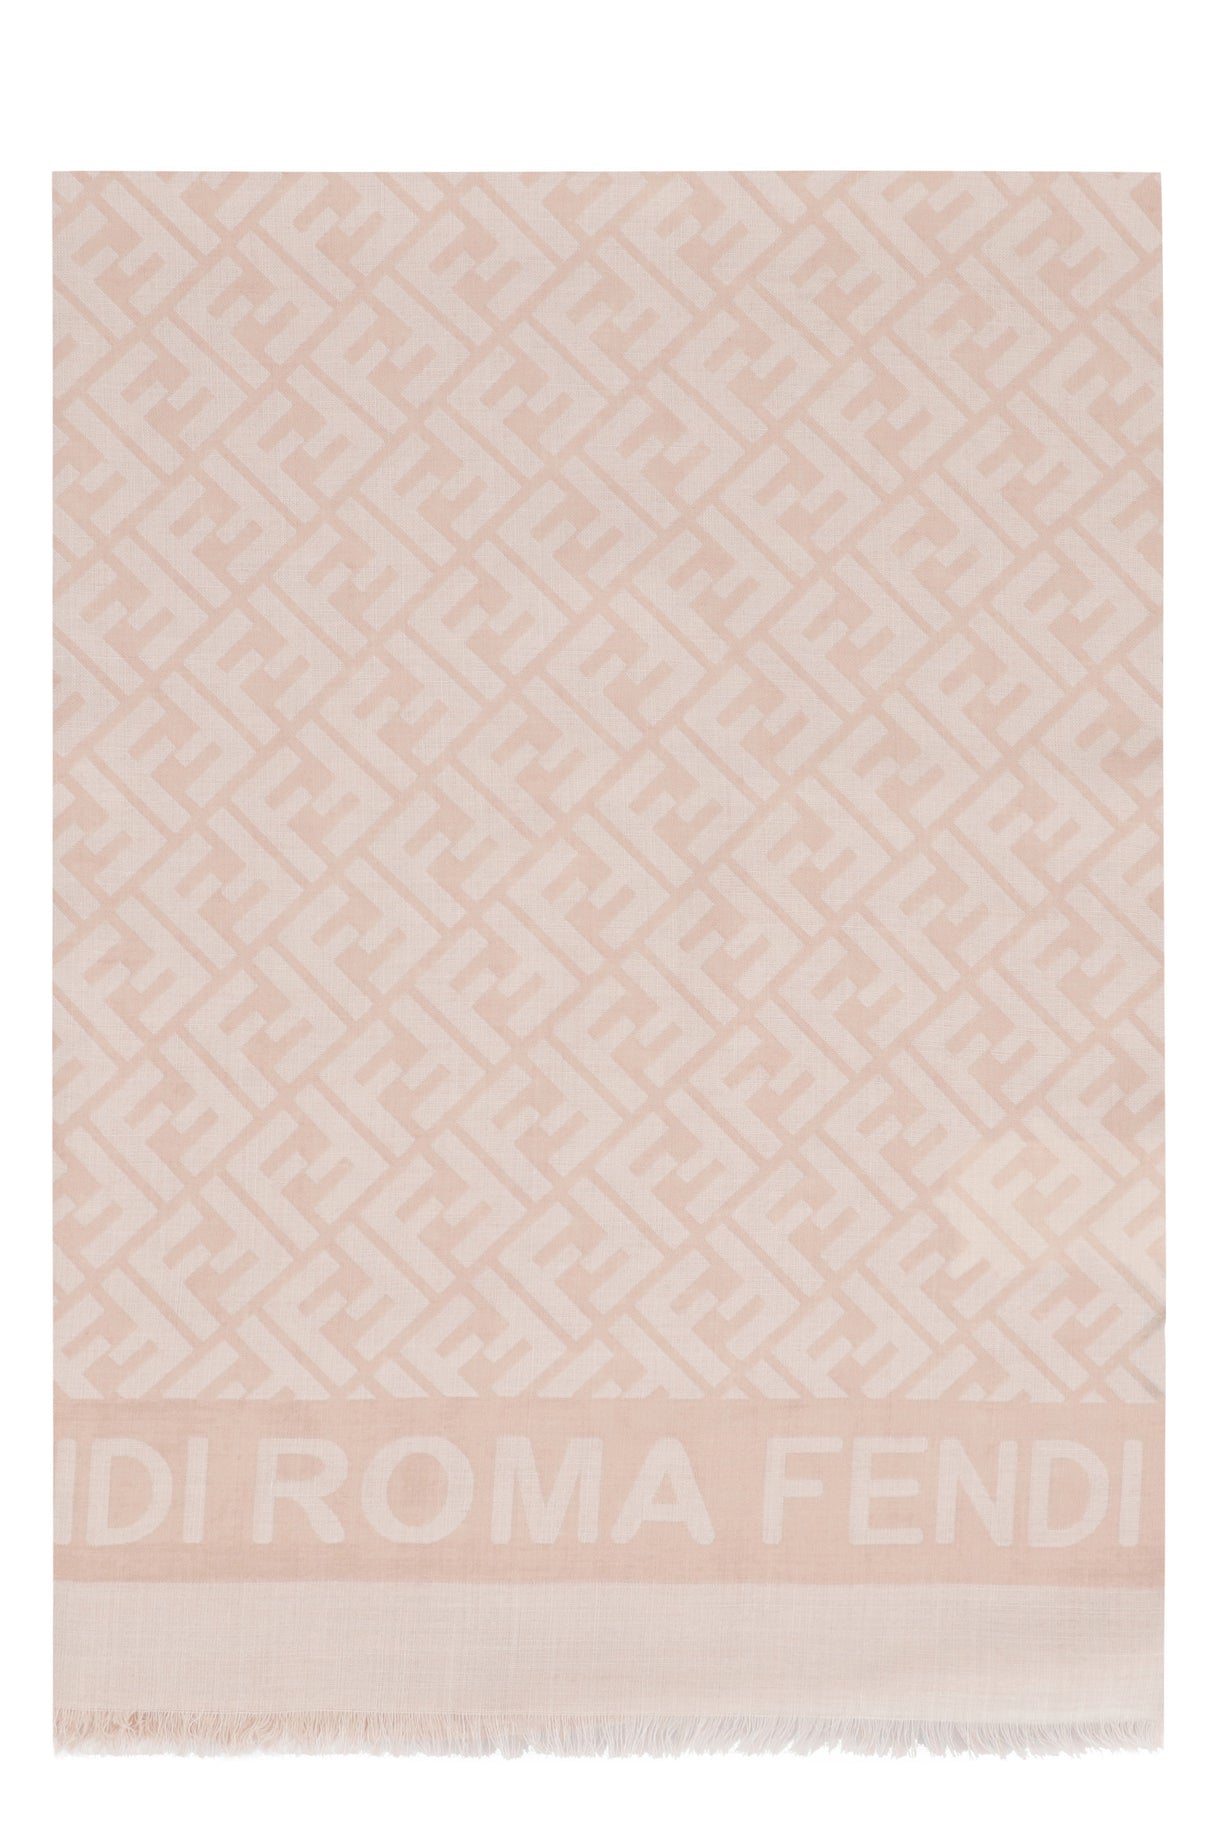 FENDI Luxurious Pink Wool and Silk Scarf for Women